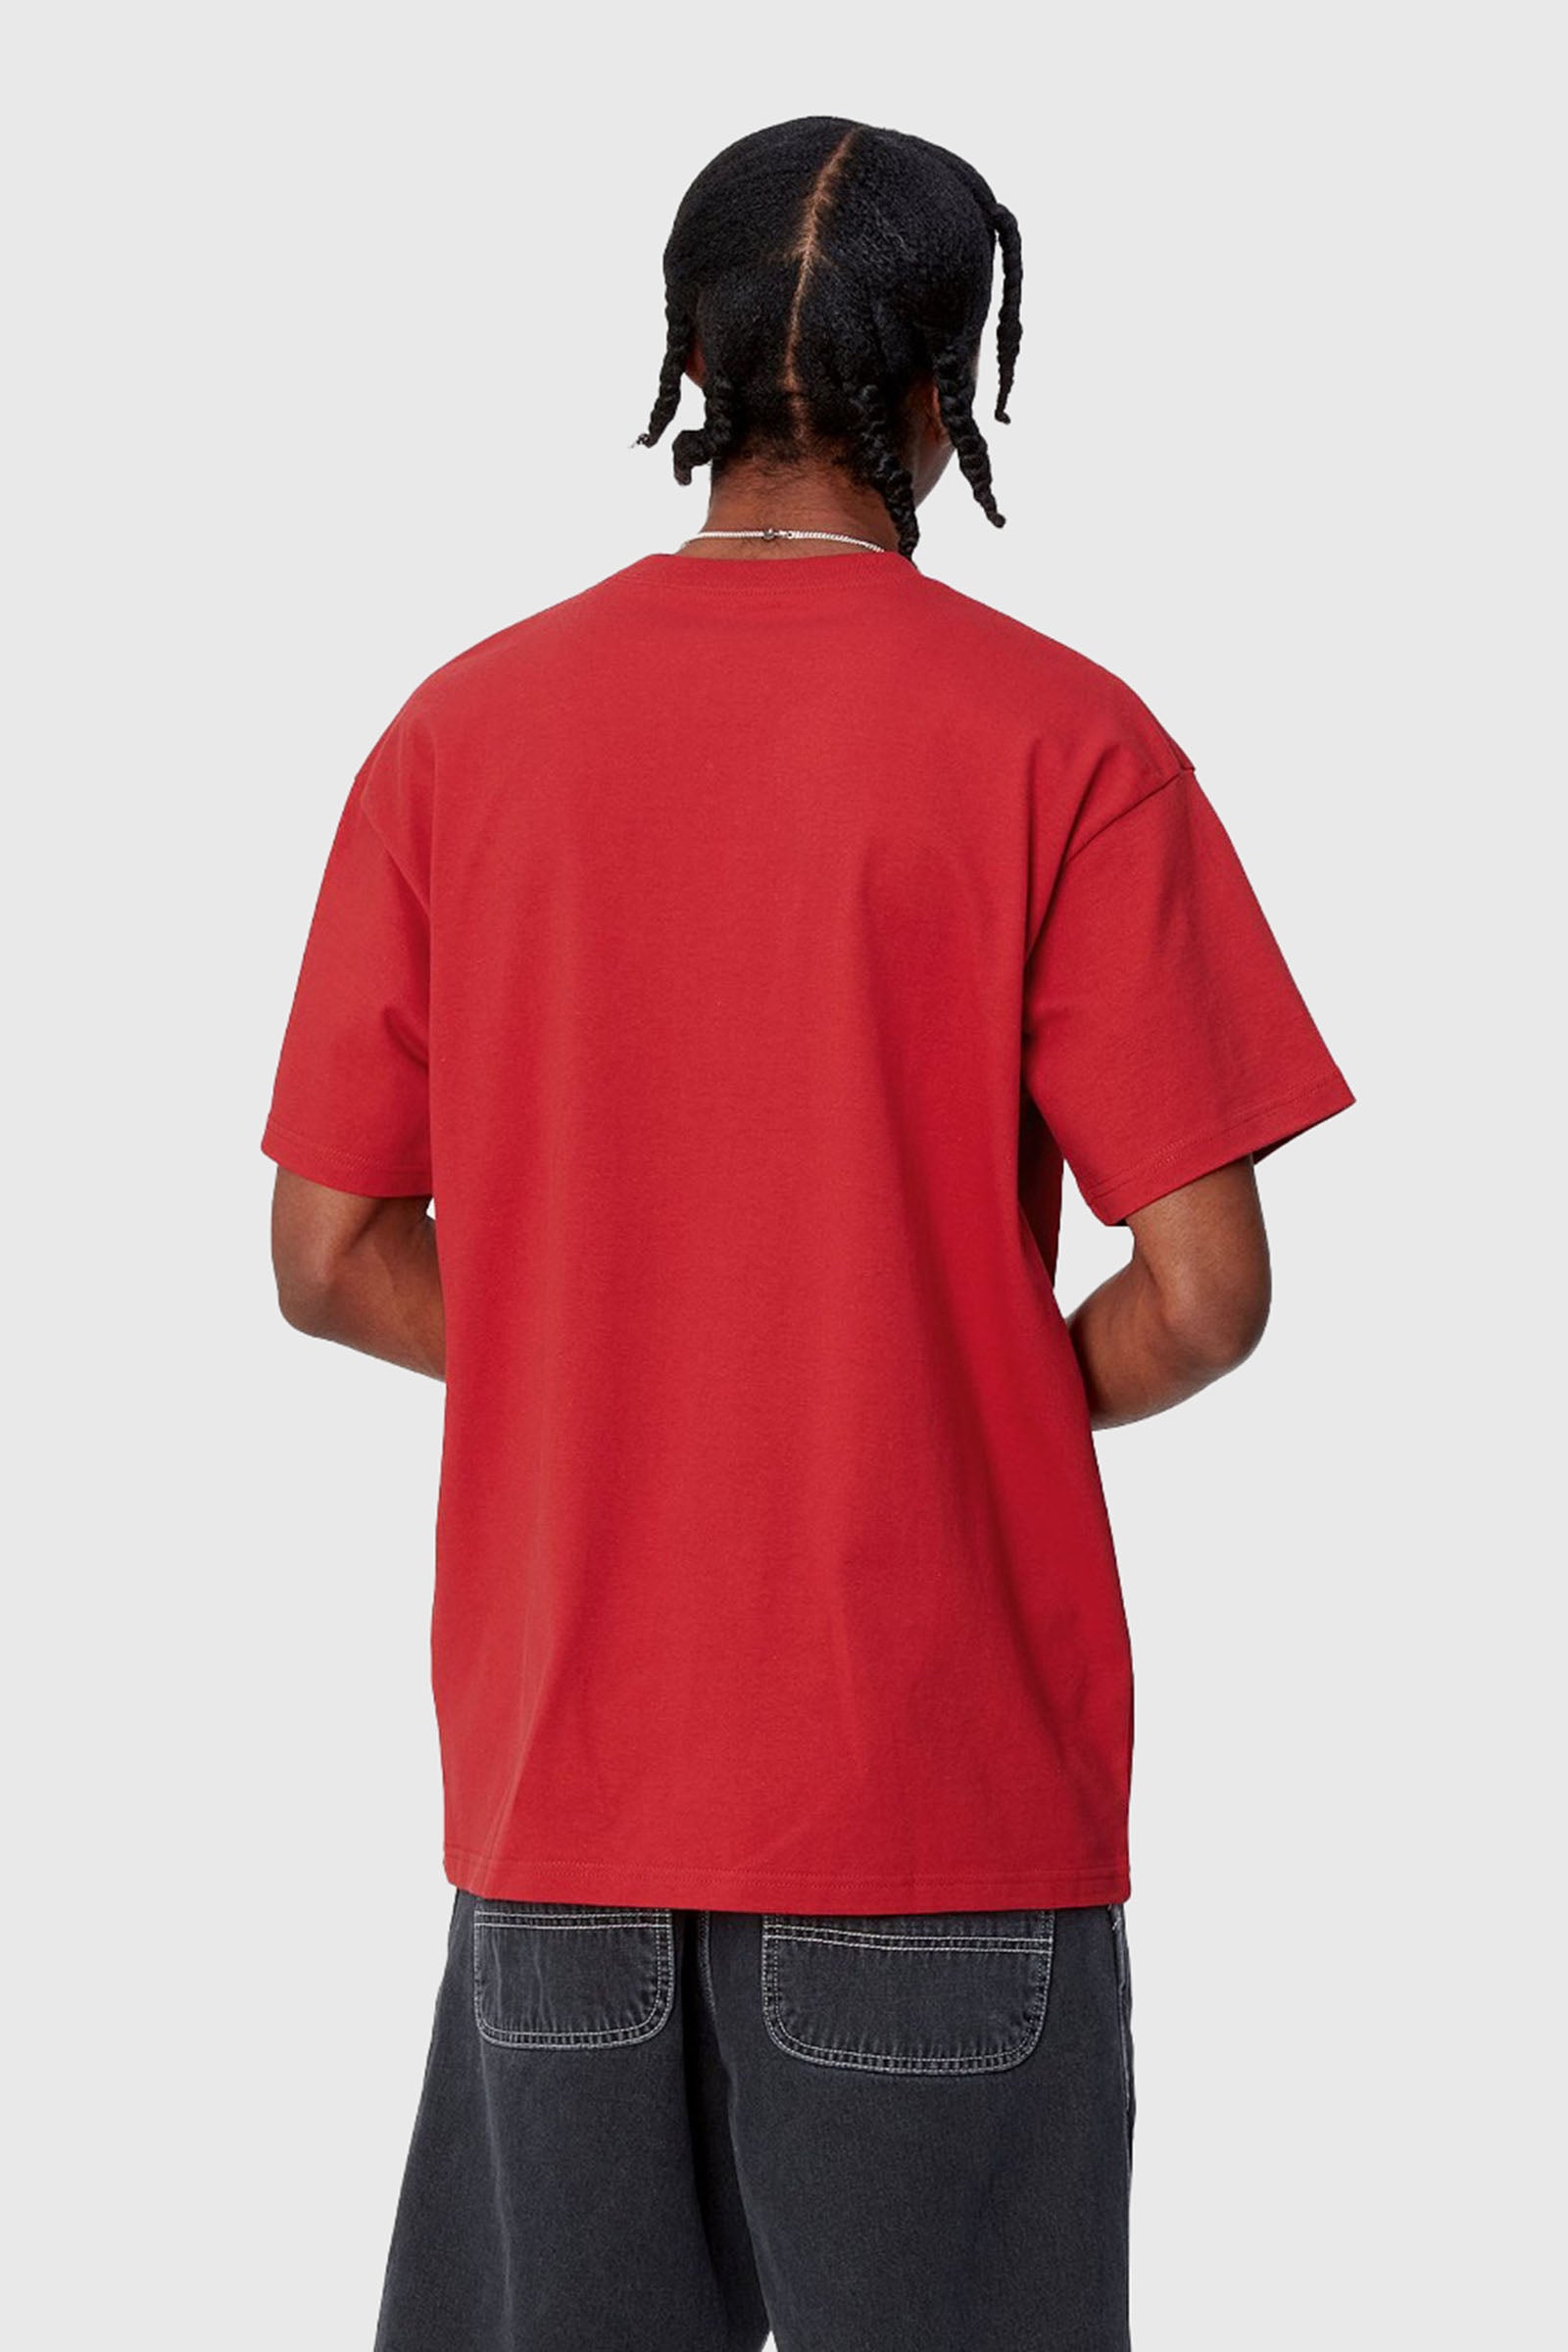 Carhartt WIP T-Shirt S/S Smart Sports Cotone Rosso - 2